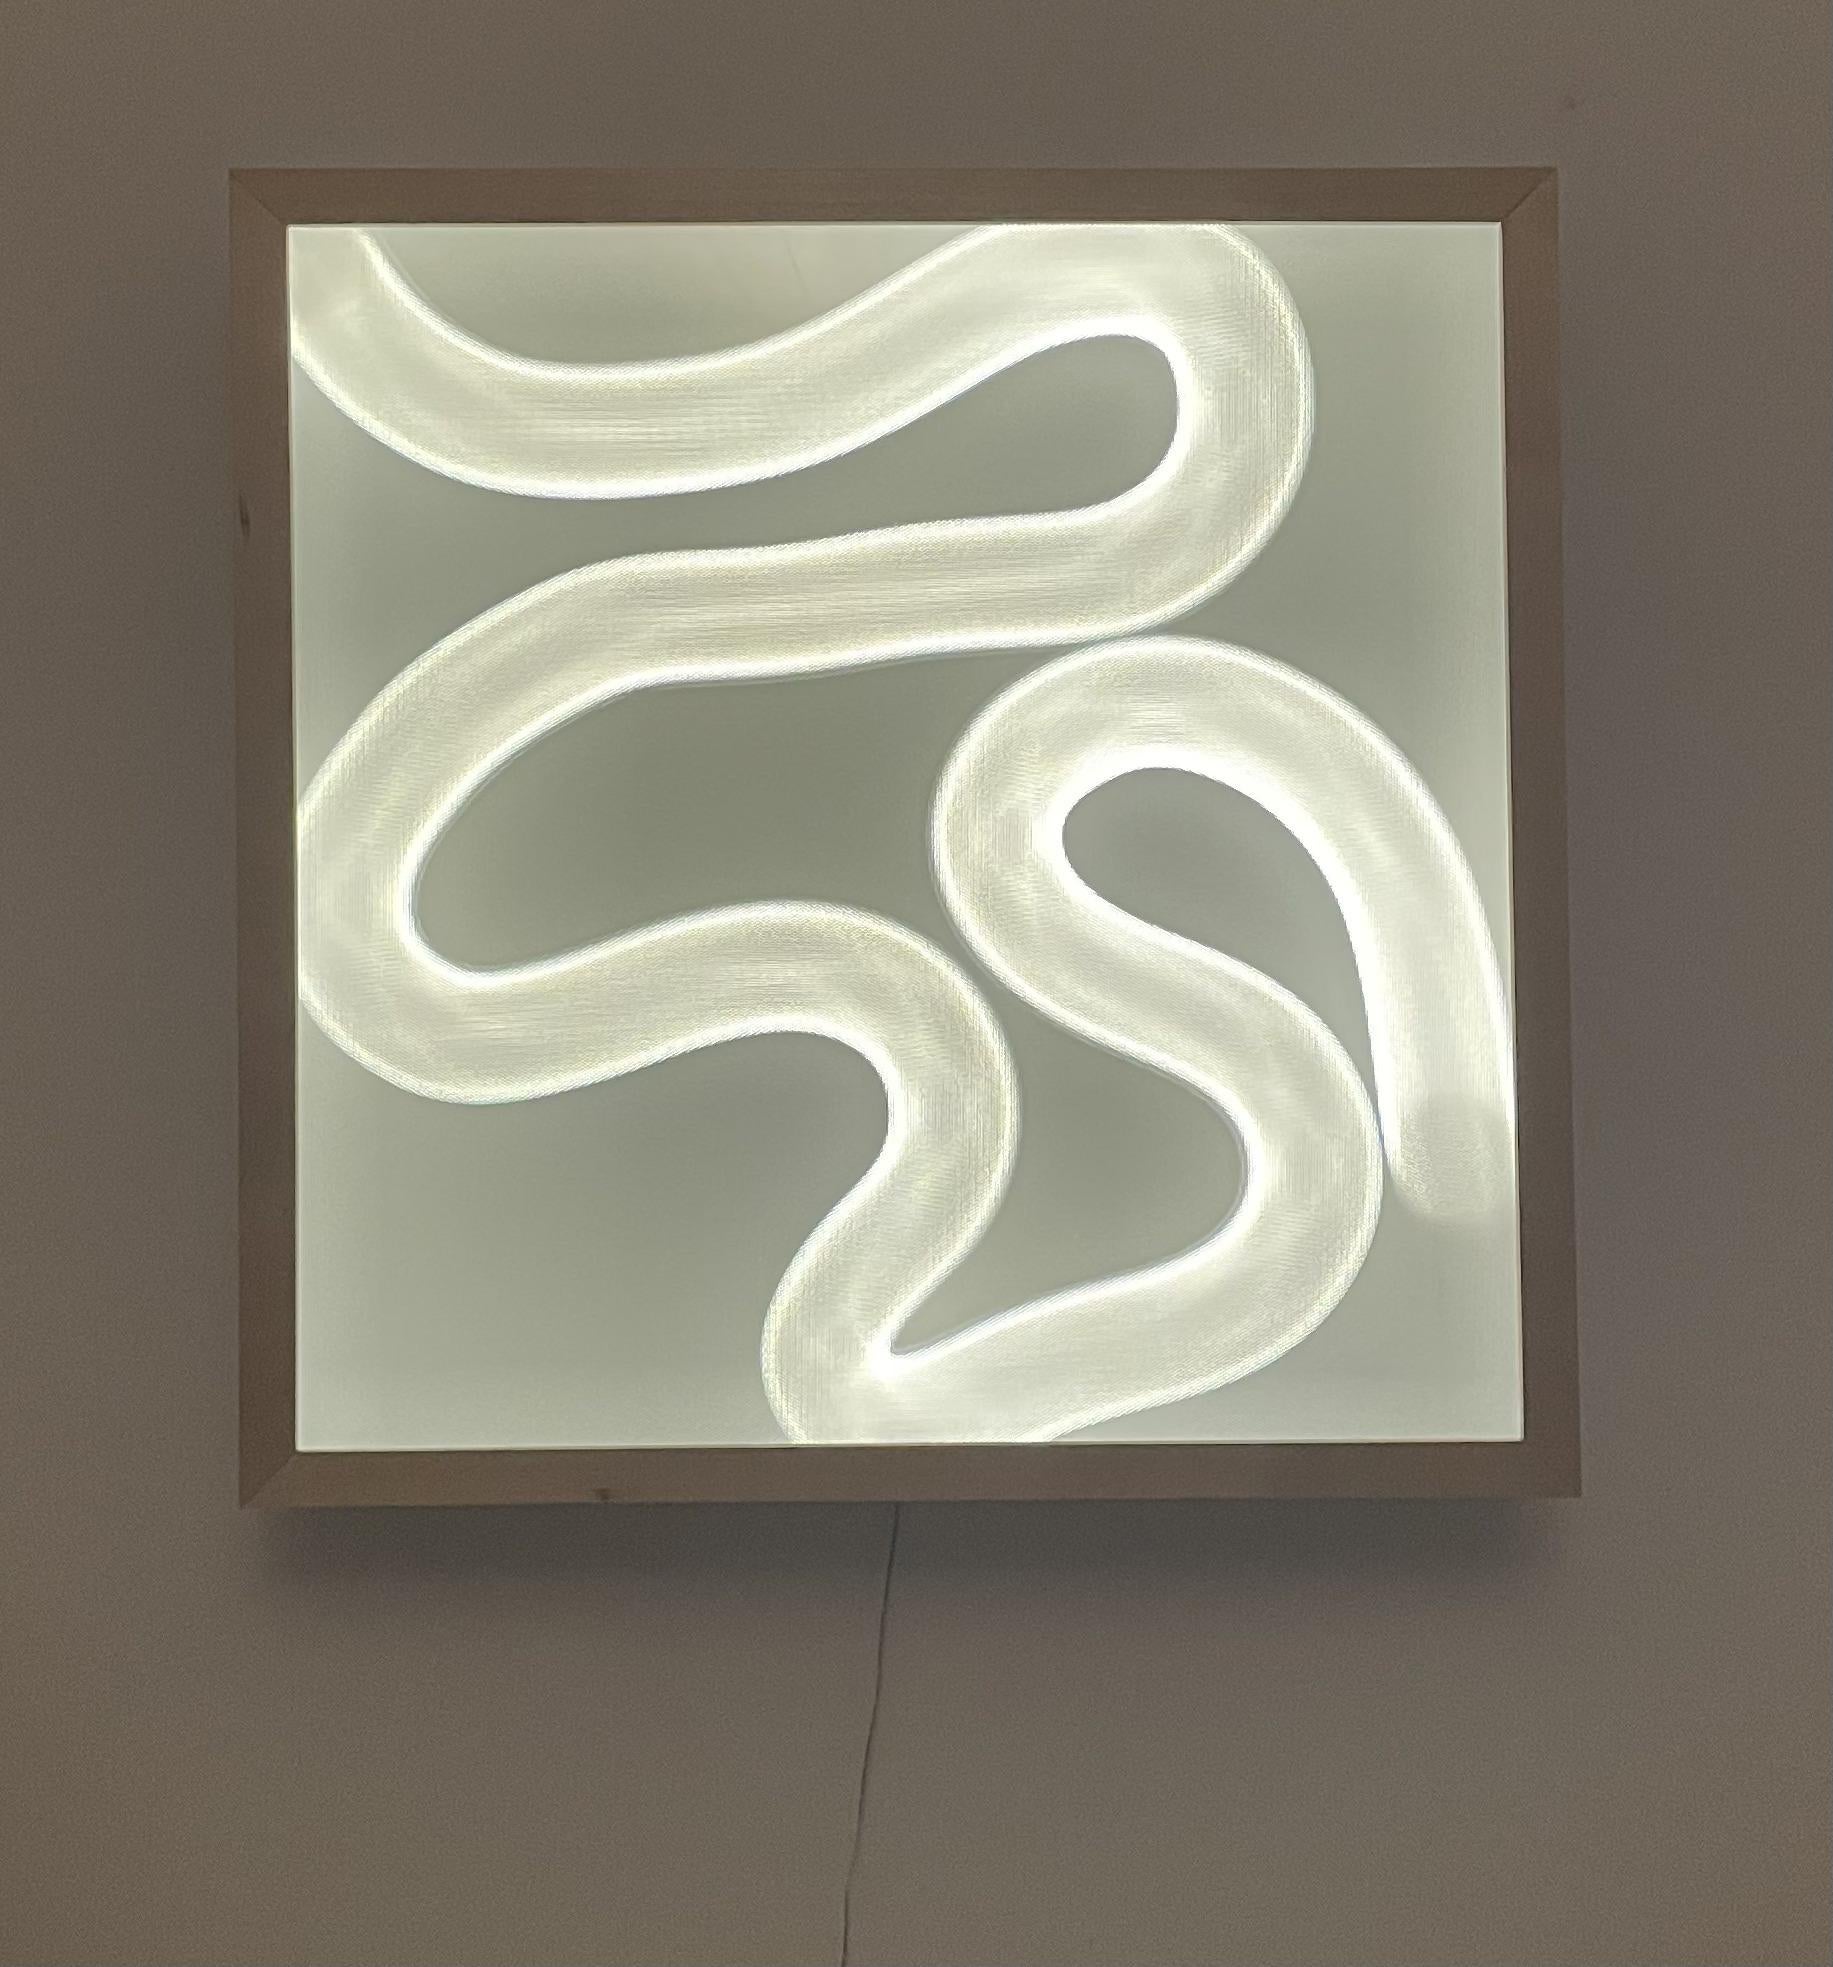 Aramse light sculpture by Studio Lampent
Limited Edition of 5
Dimensions: W 70 x D 13 x H 70 cm
Materials: Acrylic sheets, dimmable LED lights, wood

All our lamps can be wired according to each country. If sold to the USA it will be wired for